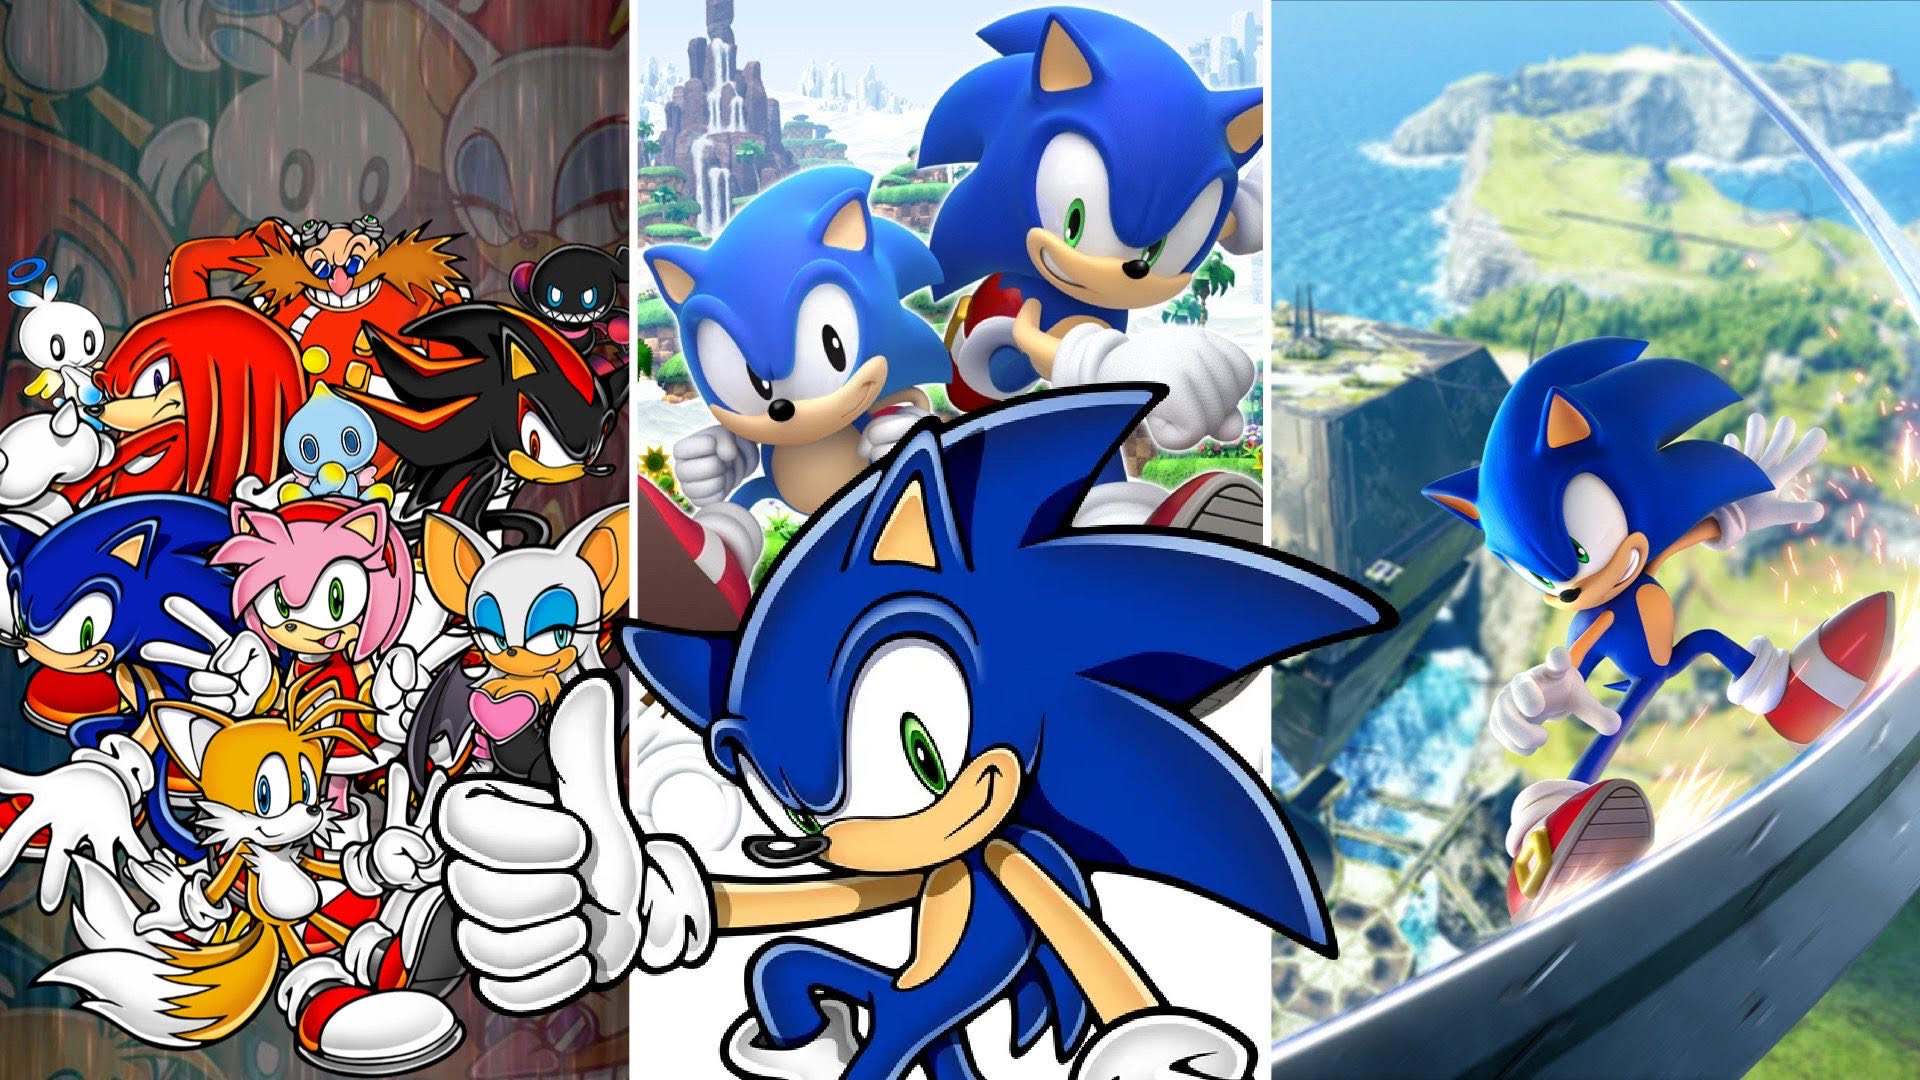 Sonic the Hedgehog: The best and worse games